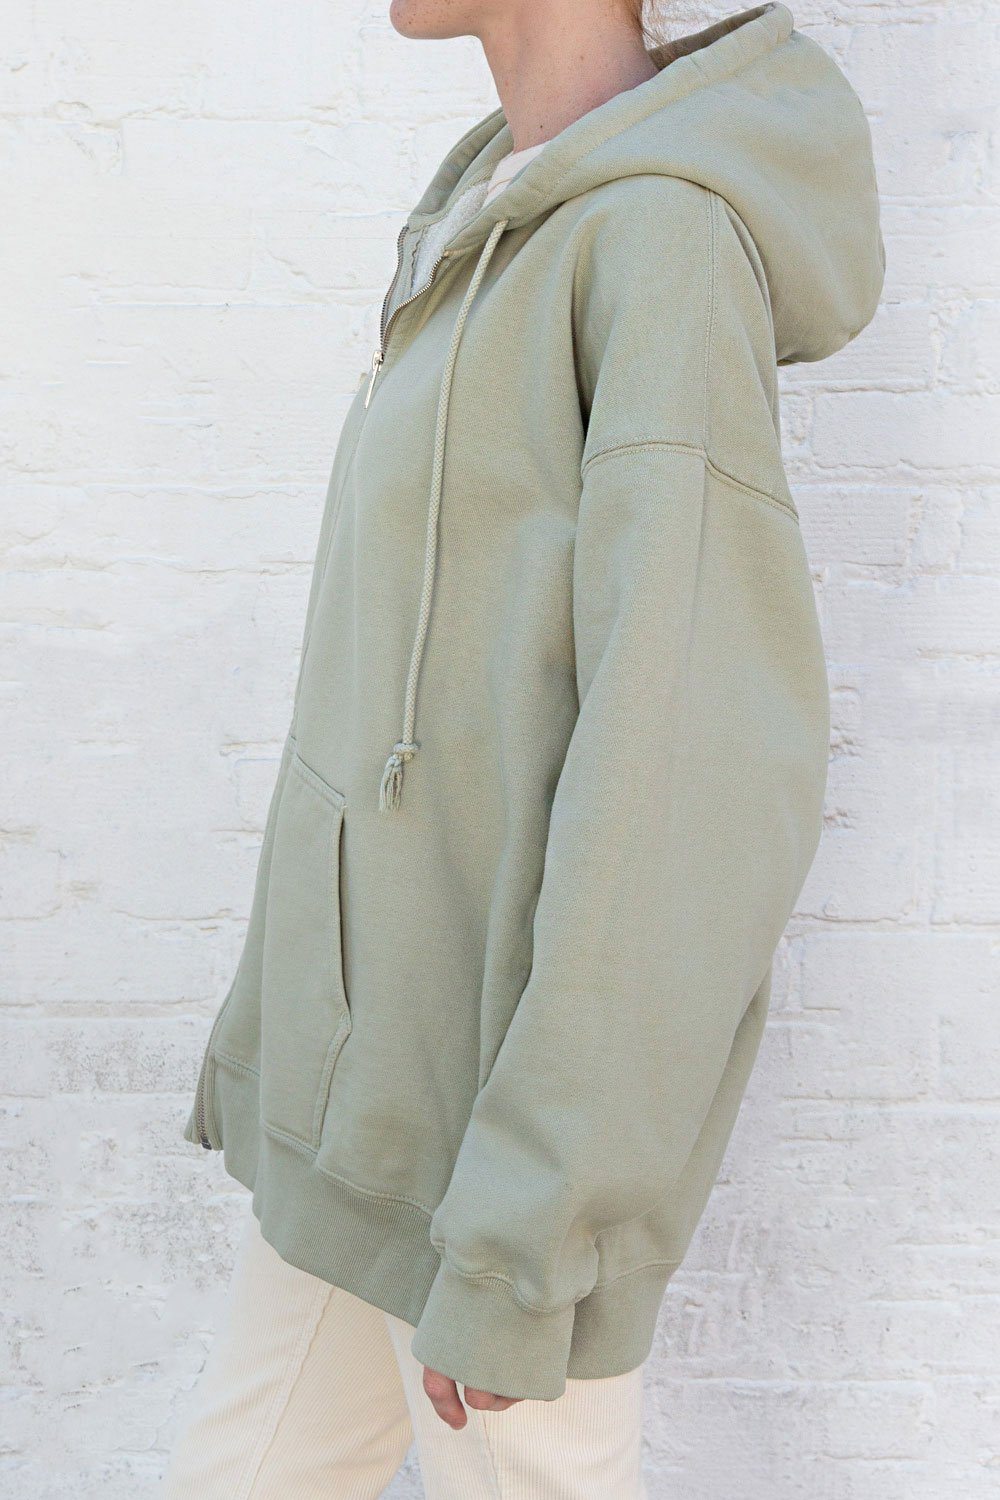 NWT Brandy Melville Oversized Green Christy Hoodie